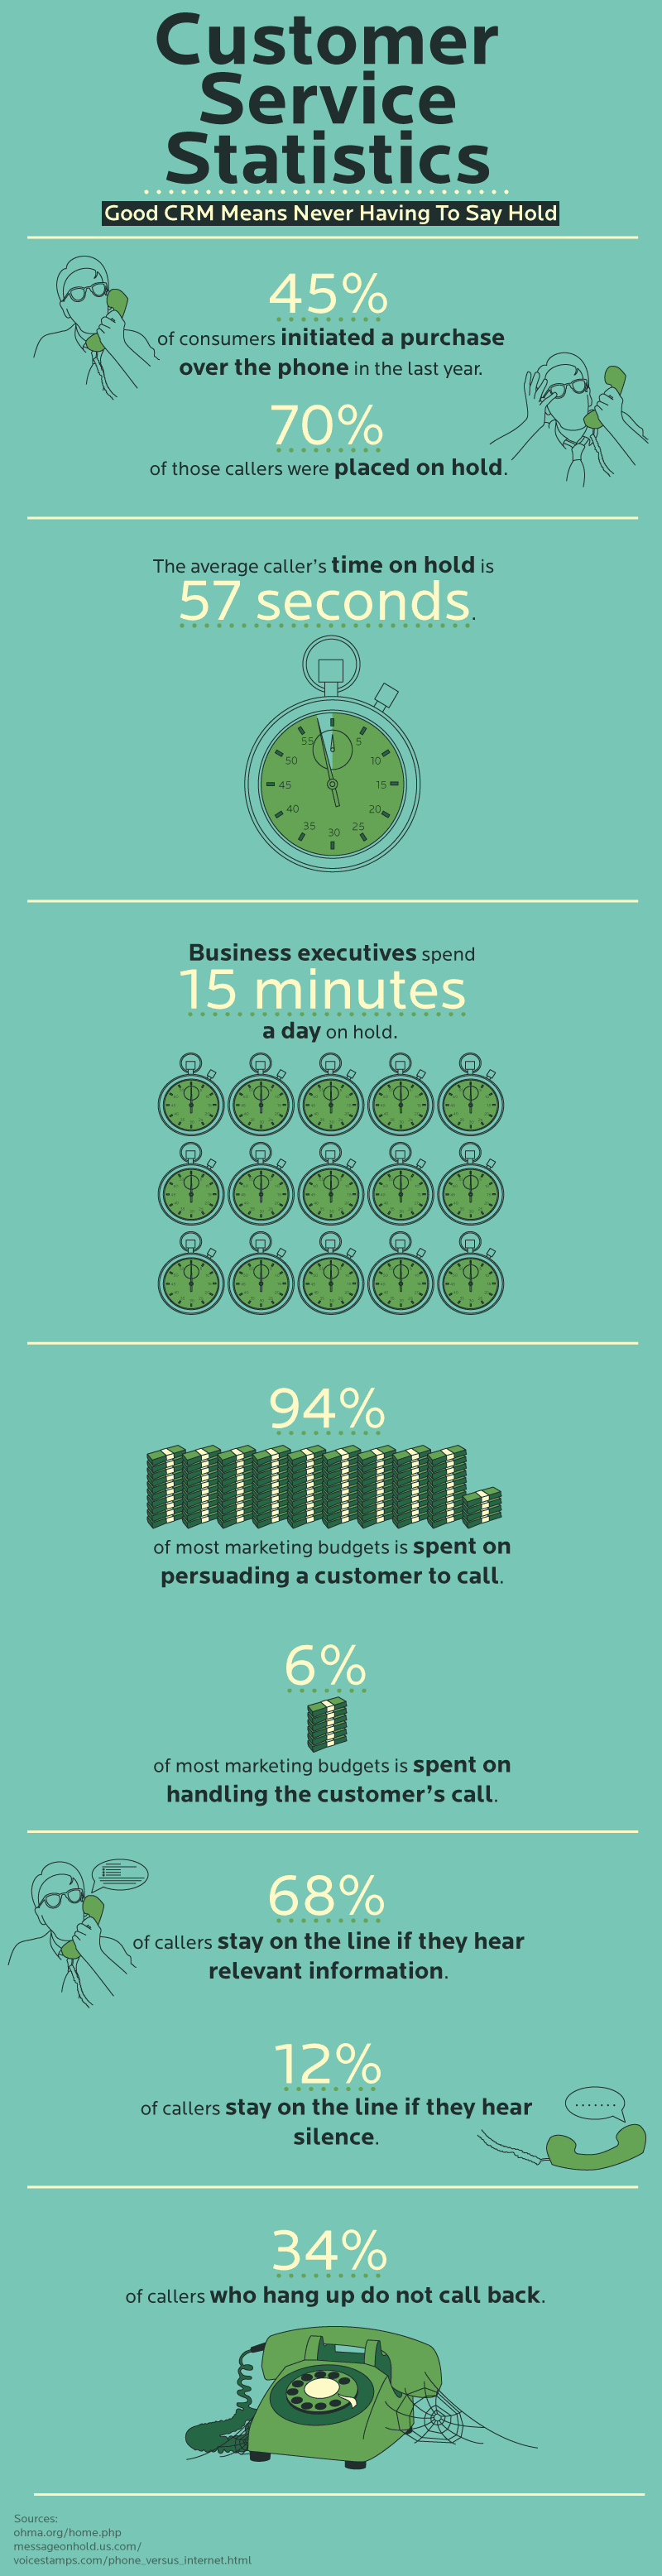 Customer Service Solutions to Avoid Long Hold Times - Infographic